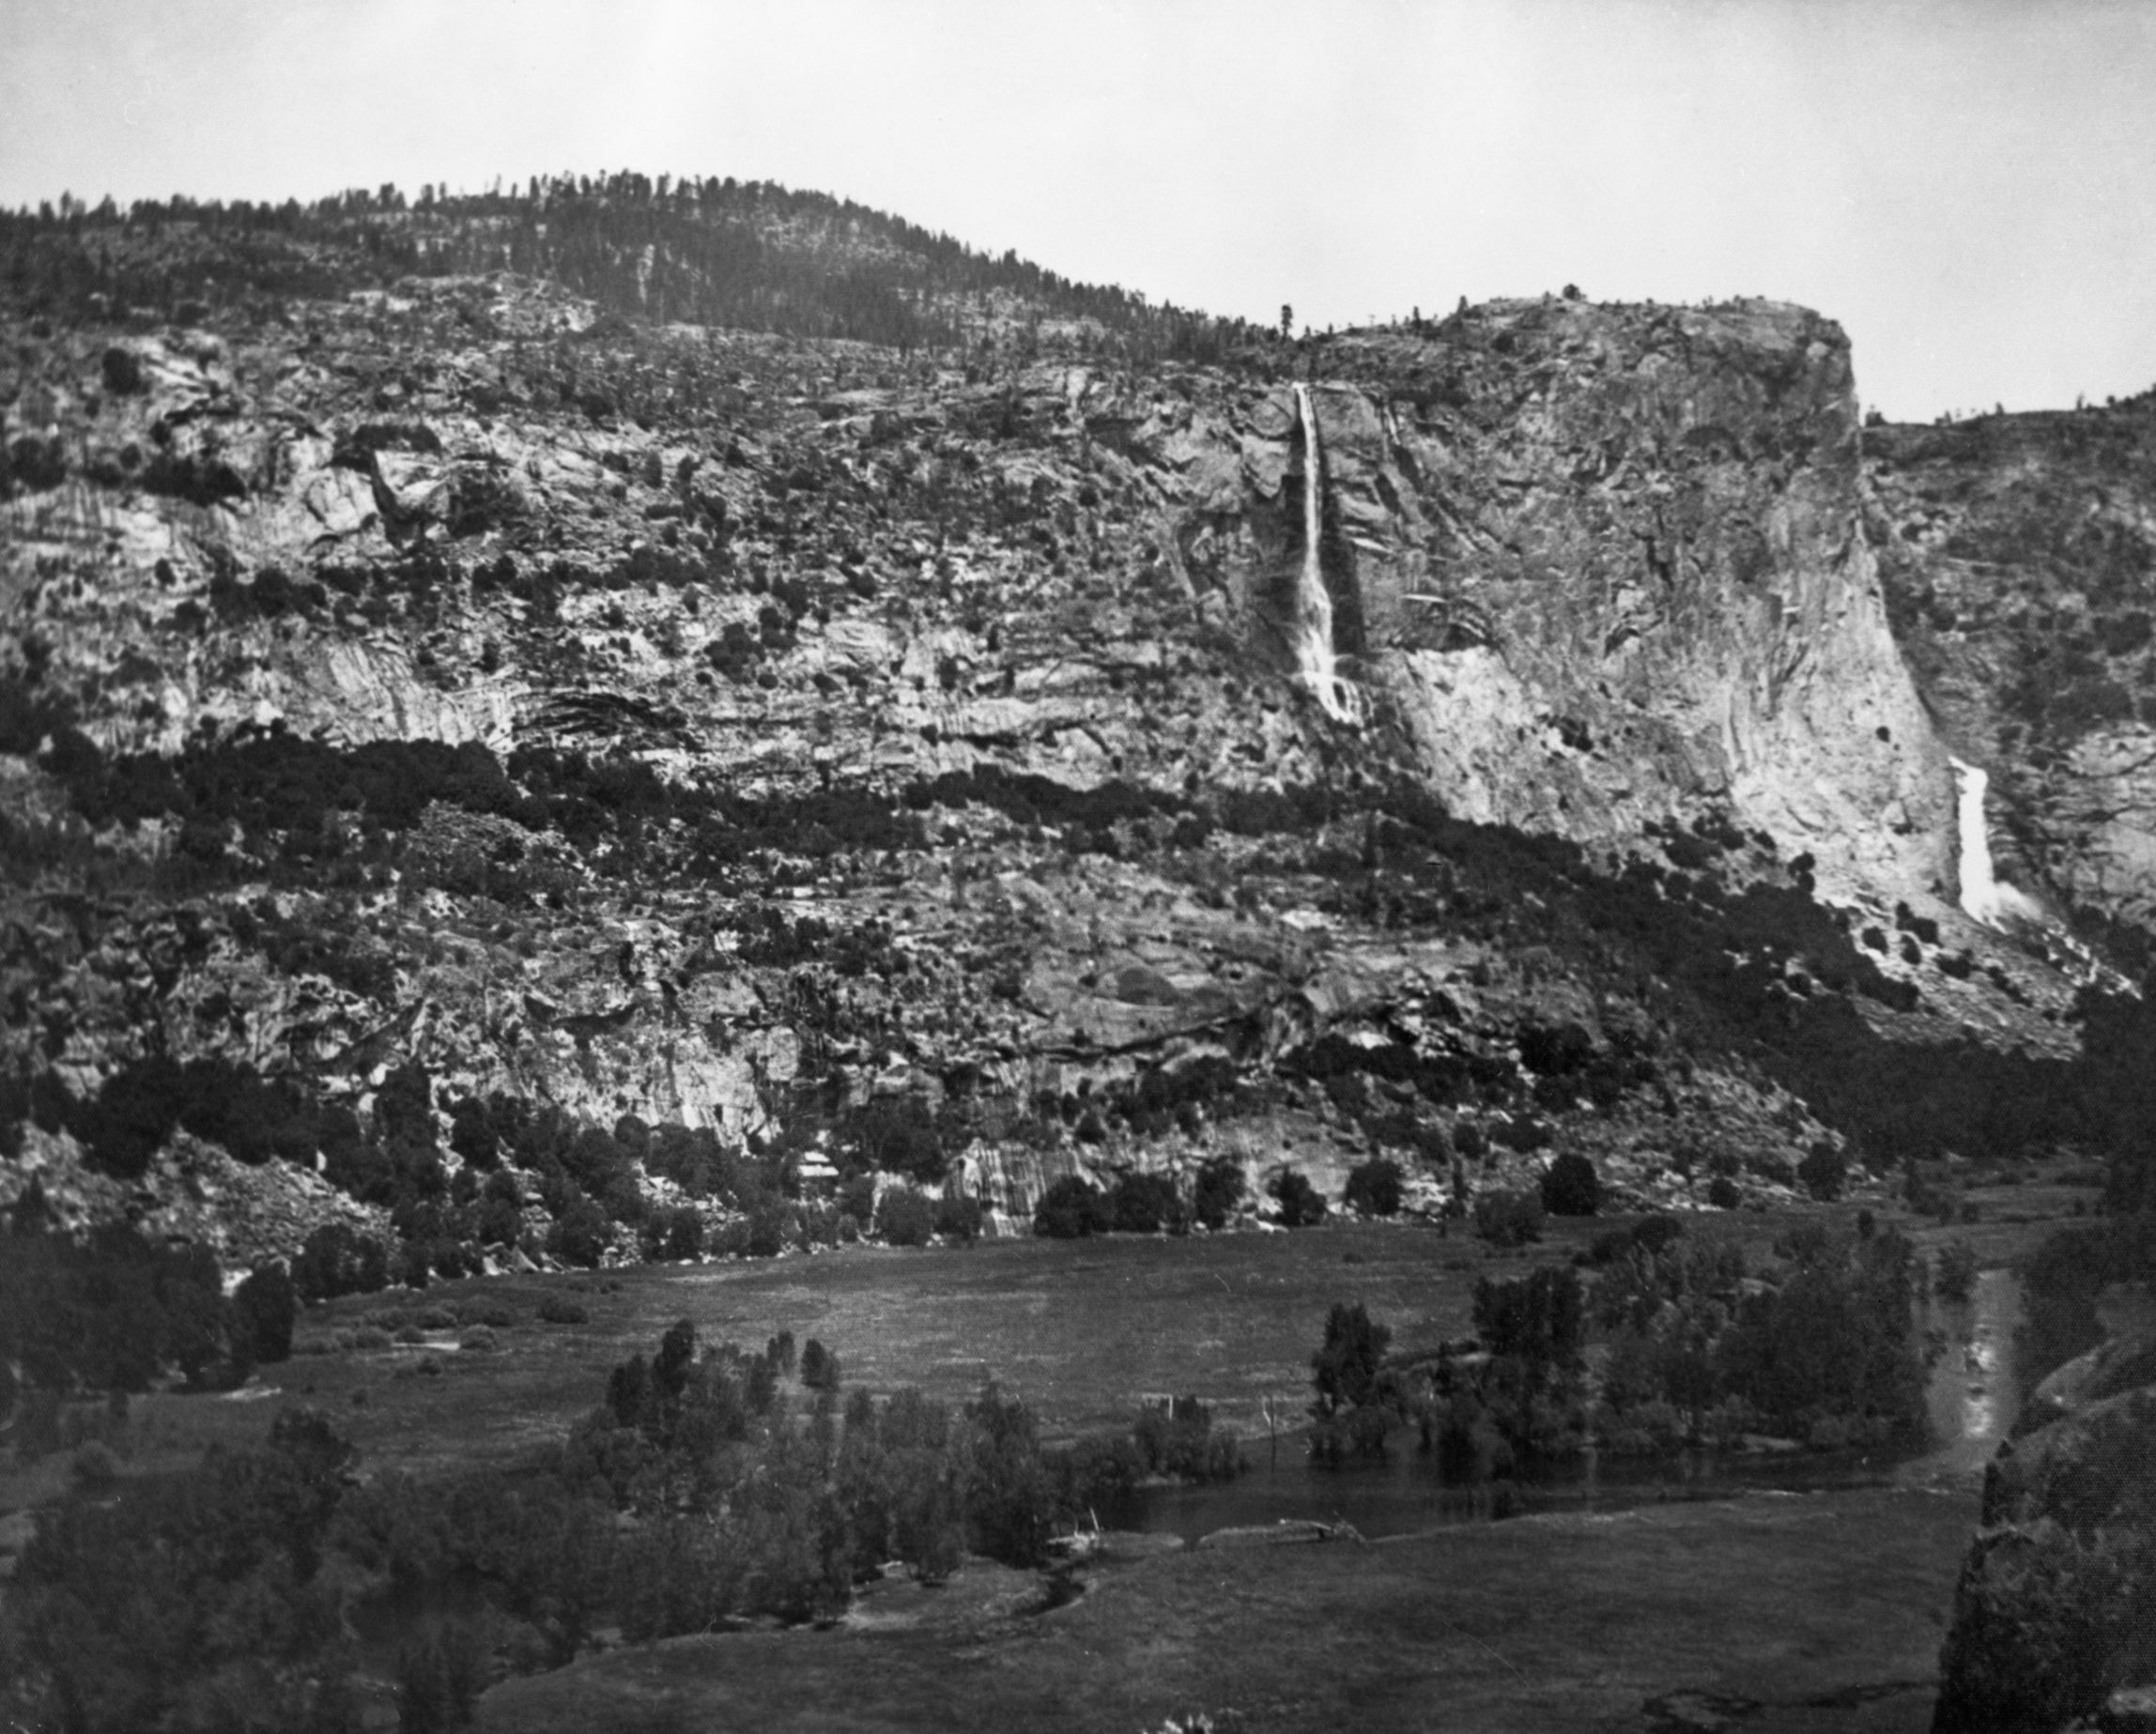 Hetch Hetchy Valley. Original in the YNP Collection (Cat. #14,758).